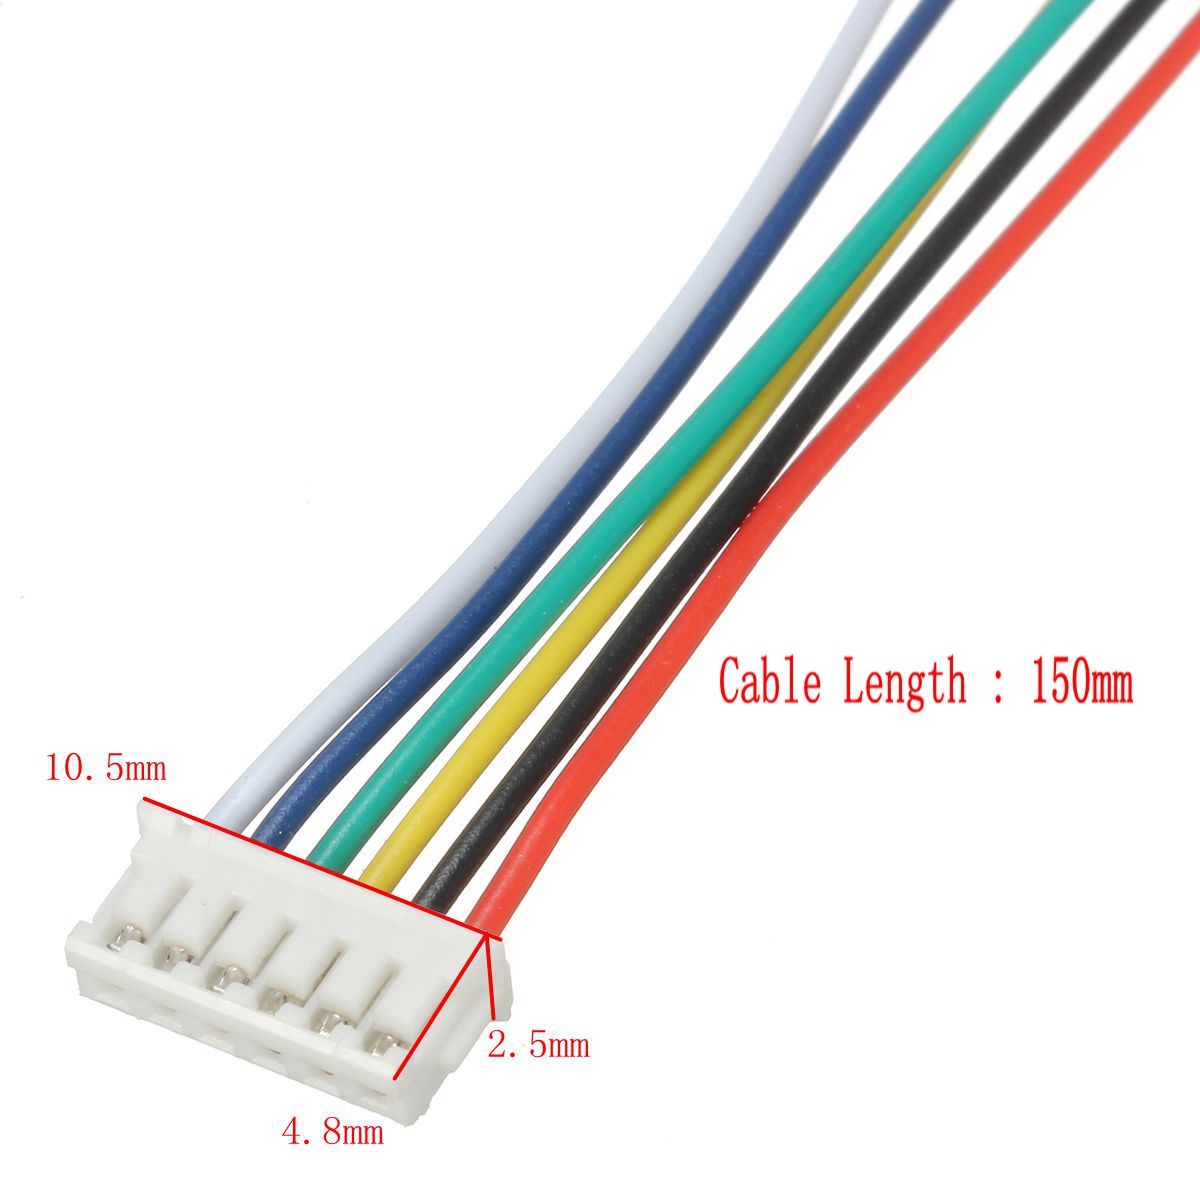 Excellwayreg-Mini-Micro-JST-15mm-ZH-6-Pin-Connector-Plug-and-Wires-Cables-15cm-10-Set-1170230-8